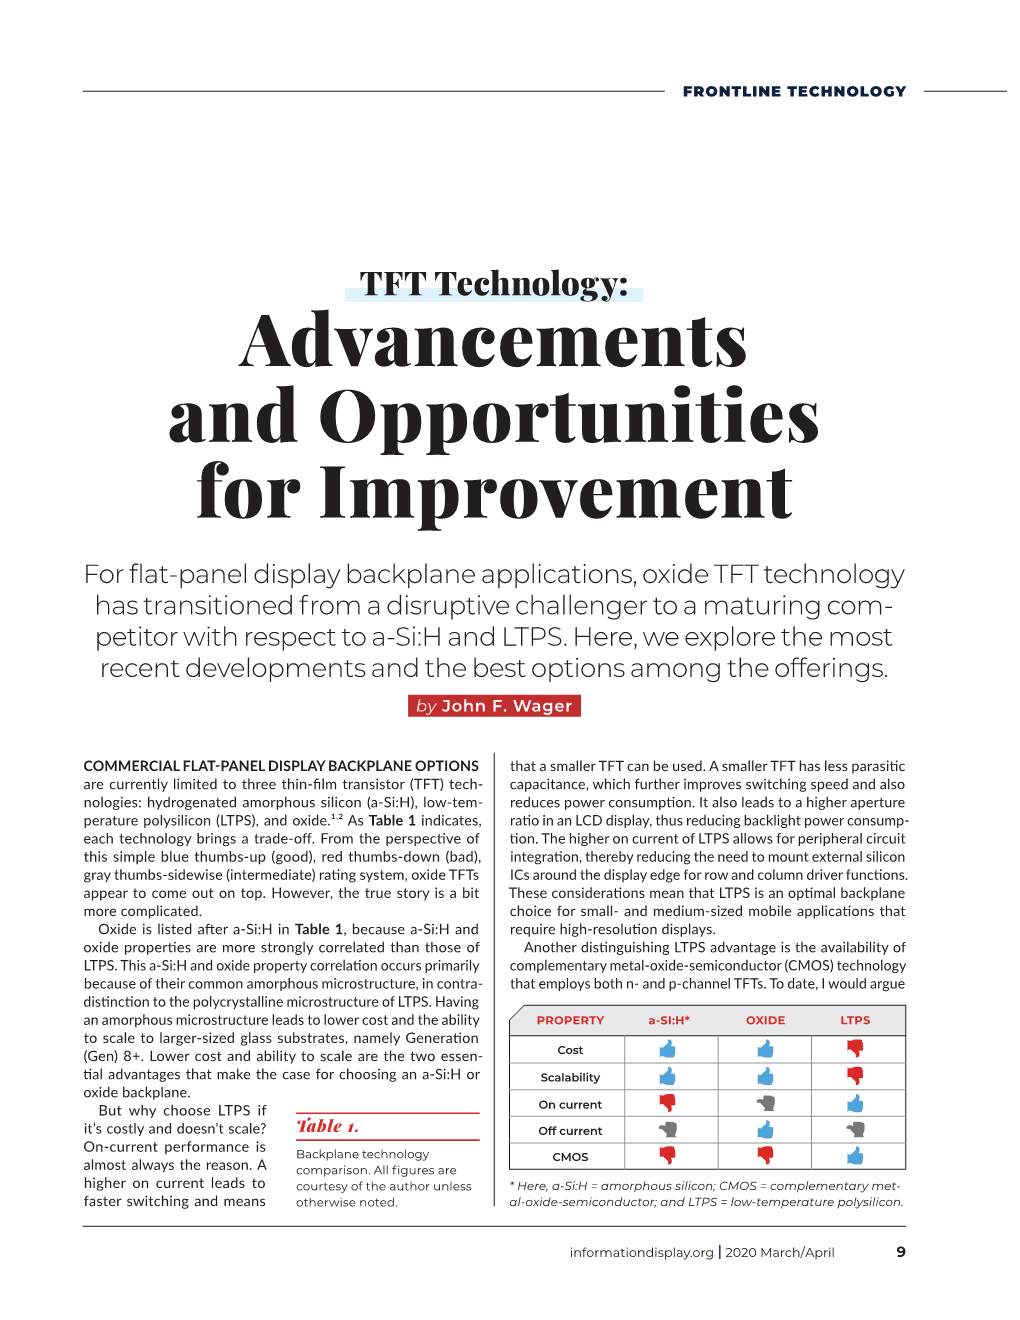 TFT Technology: Advancements and Opportunities for Improvement